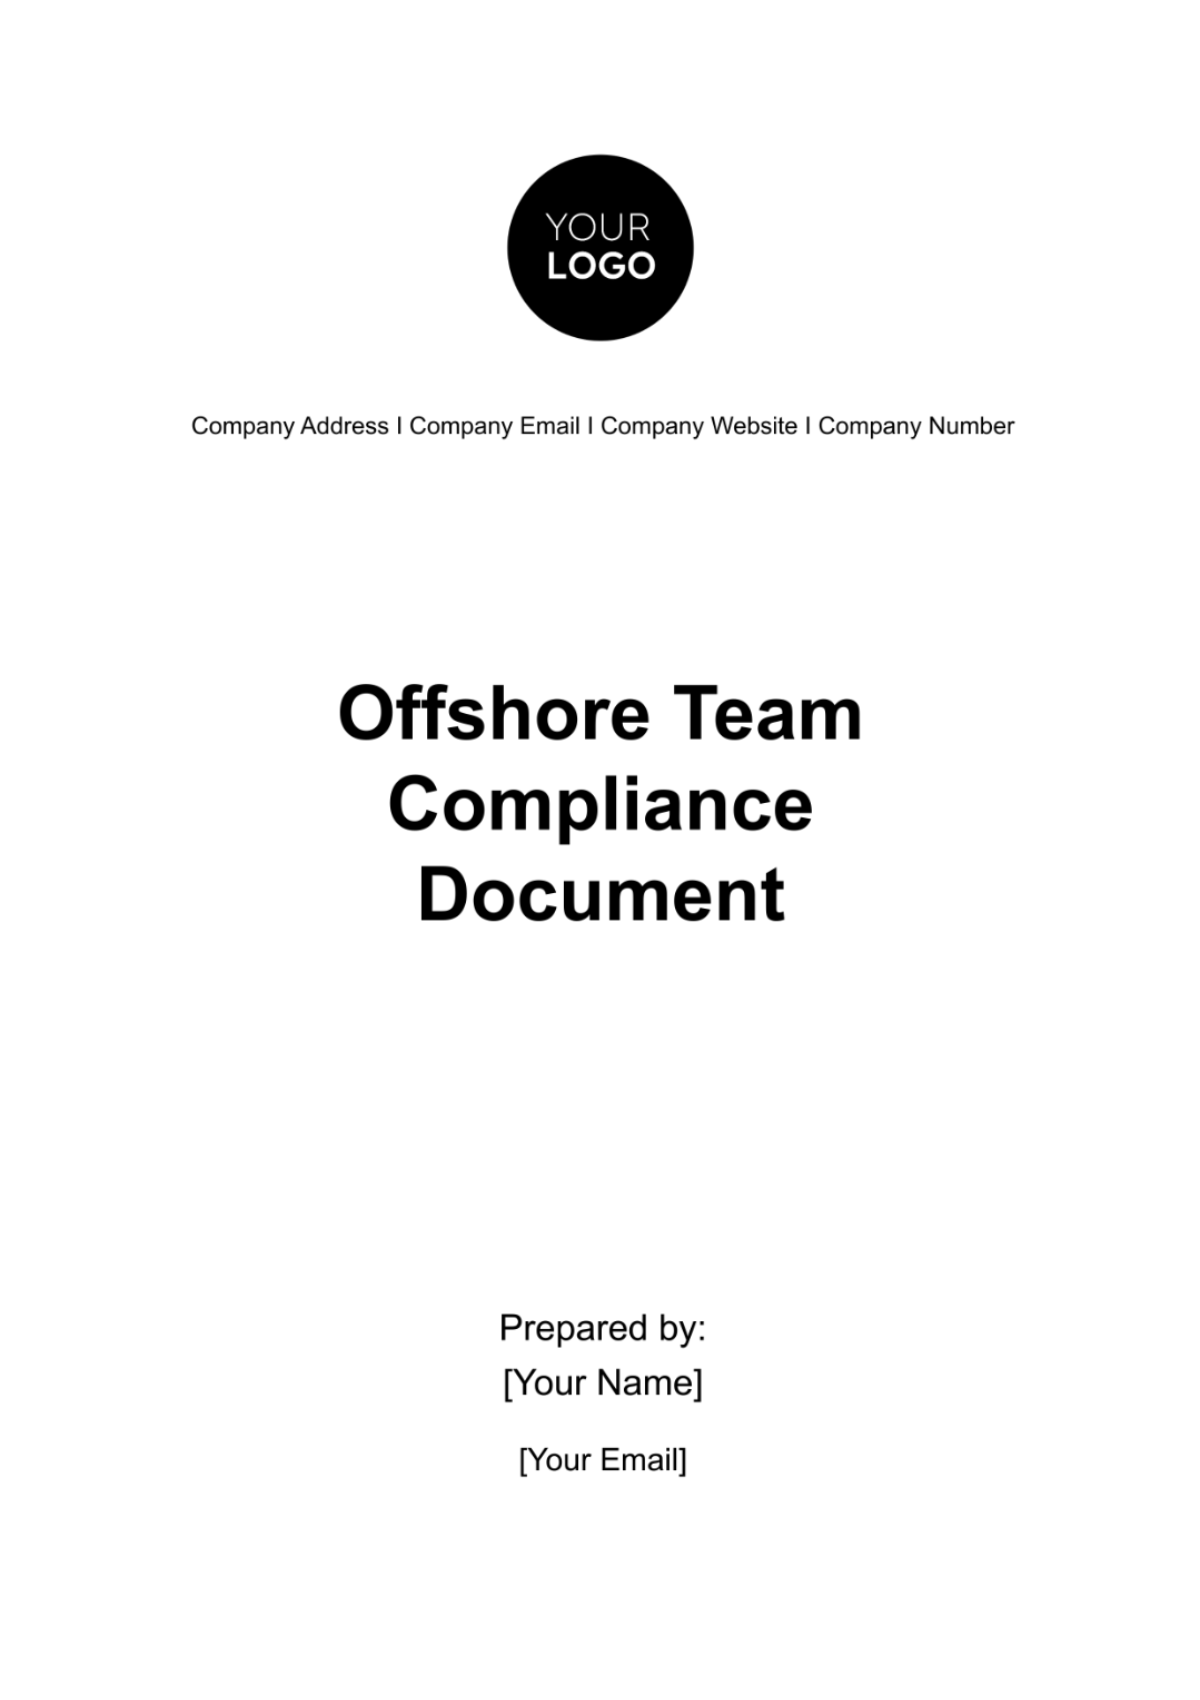 Offshore Team Compliance Document HR Template